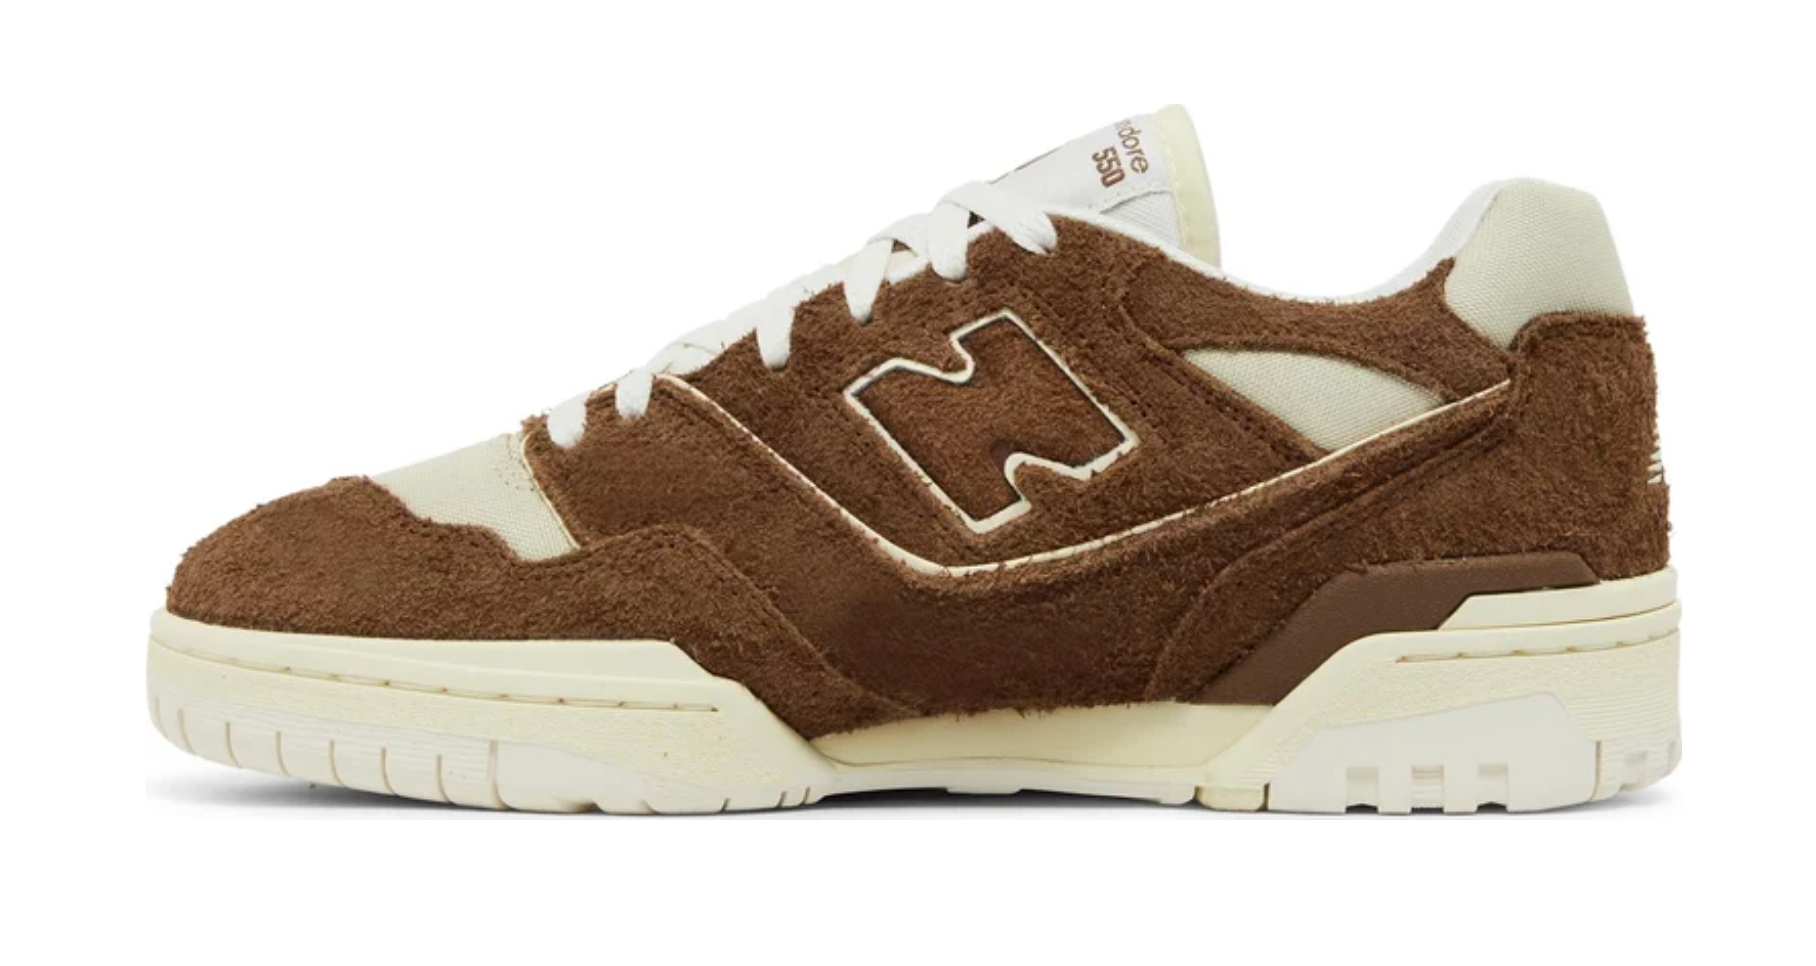 NEW BALANCE 550 AIME LEON DORE BROWN SUEDE